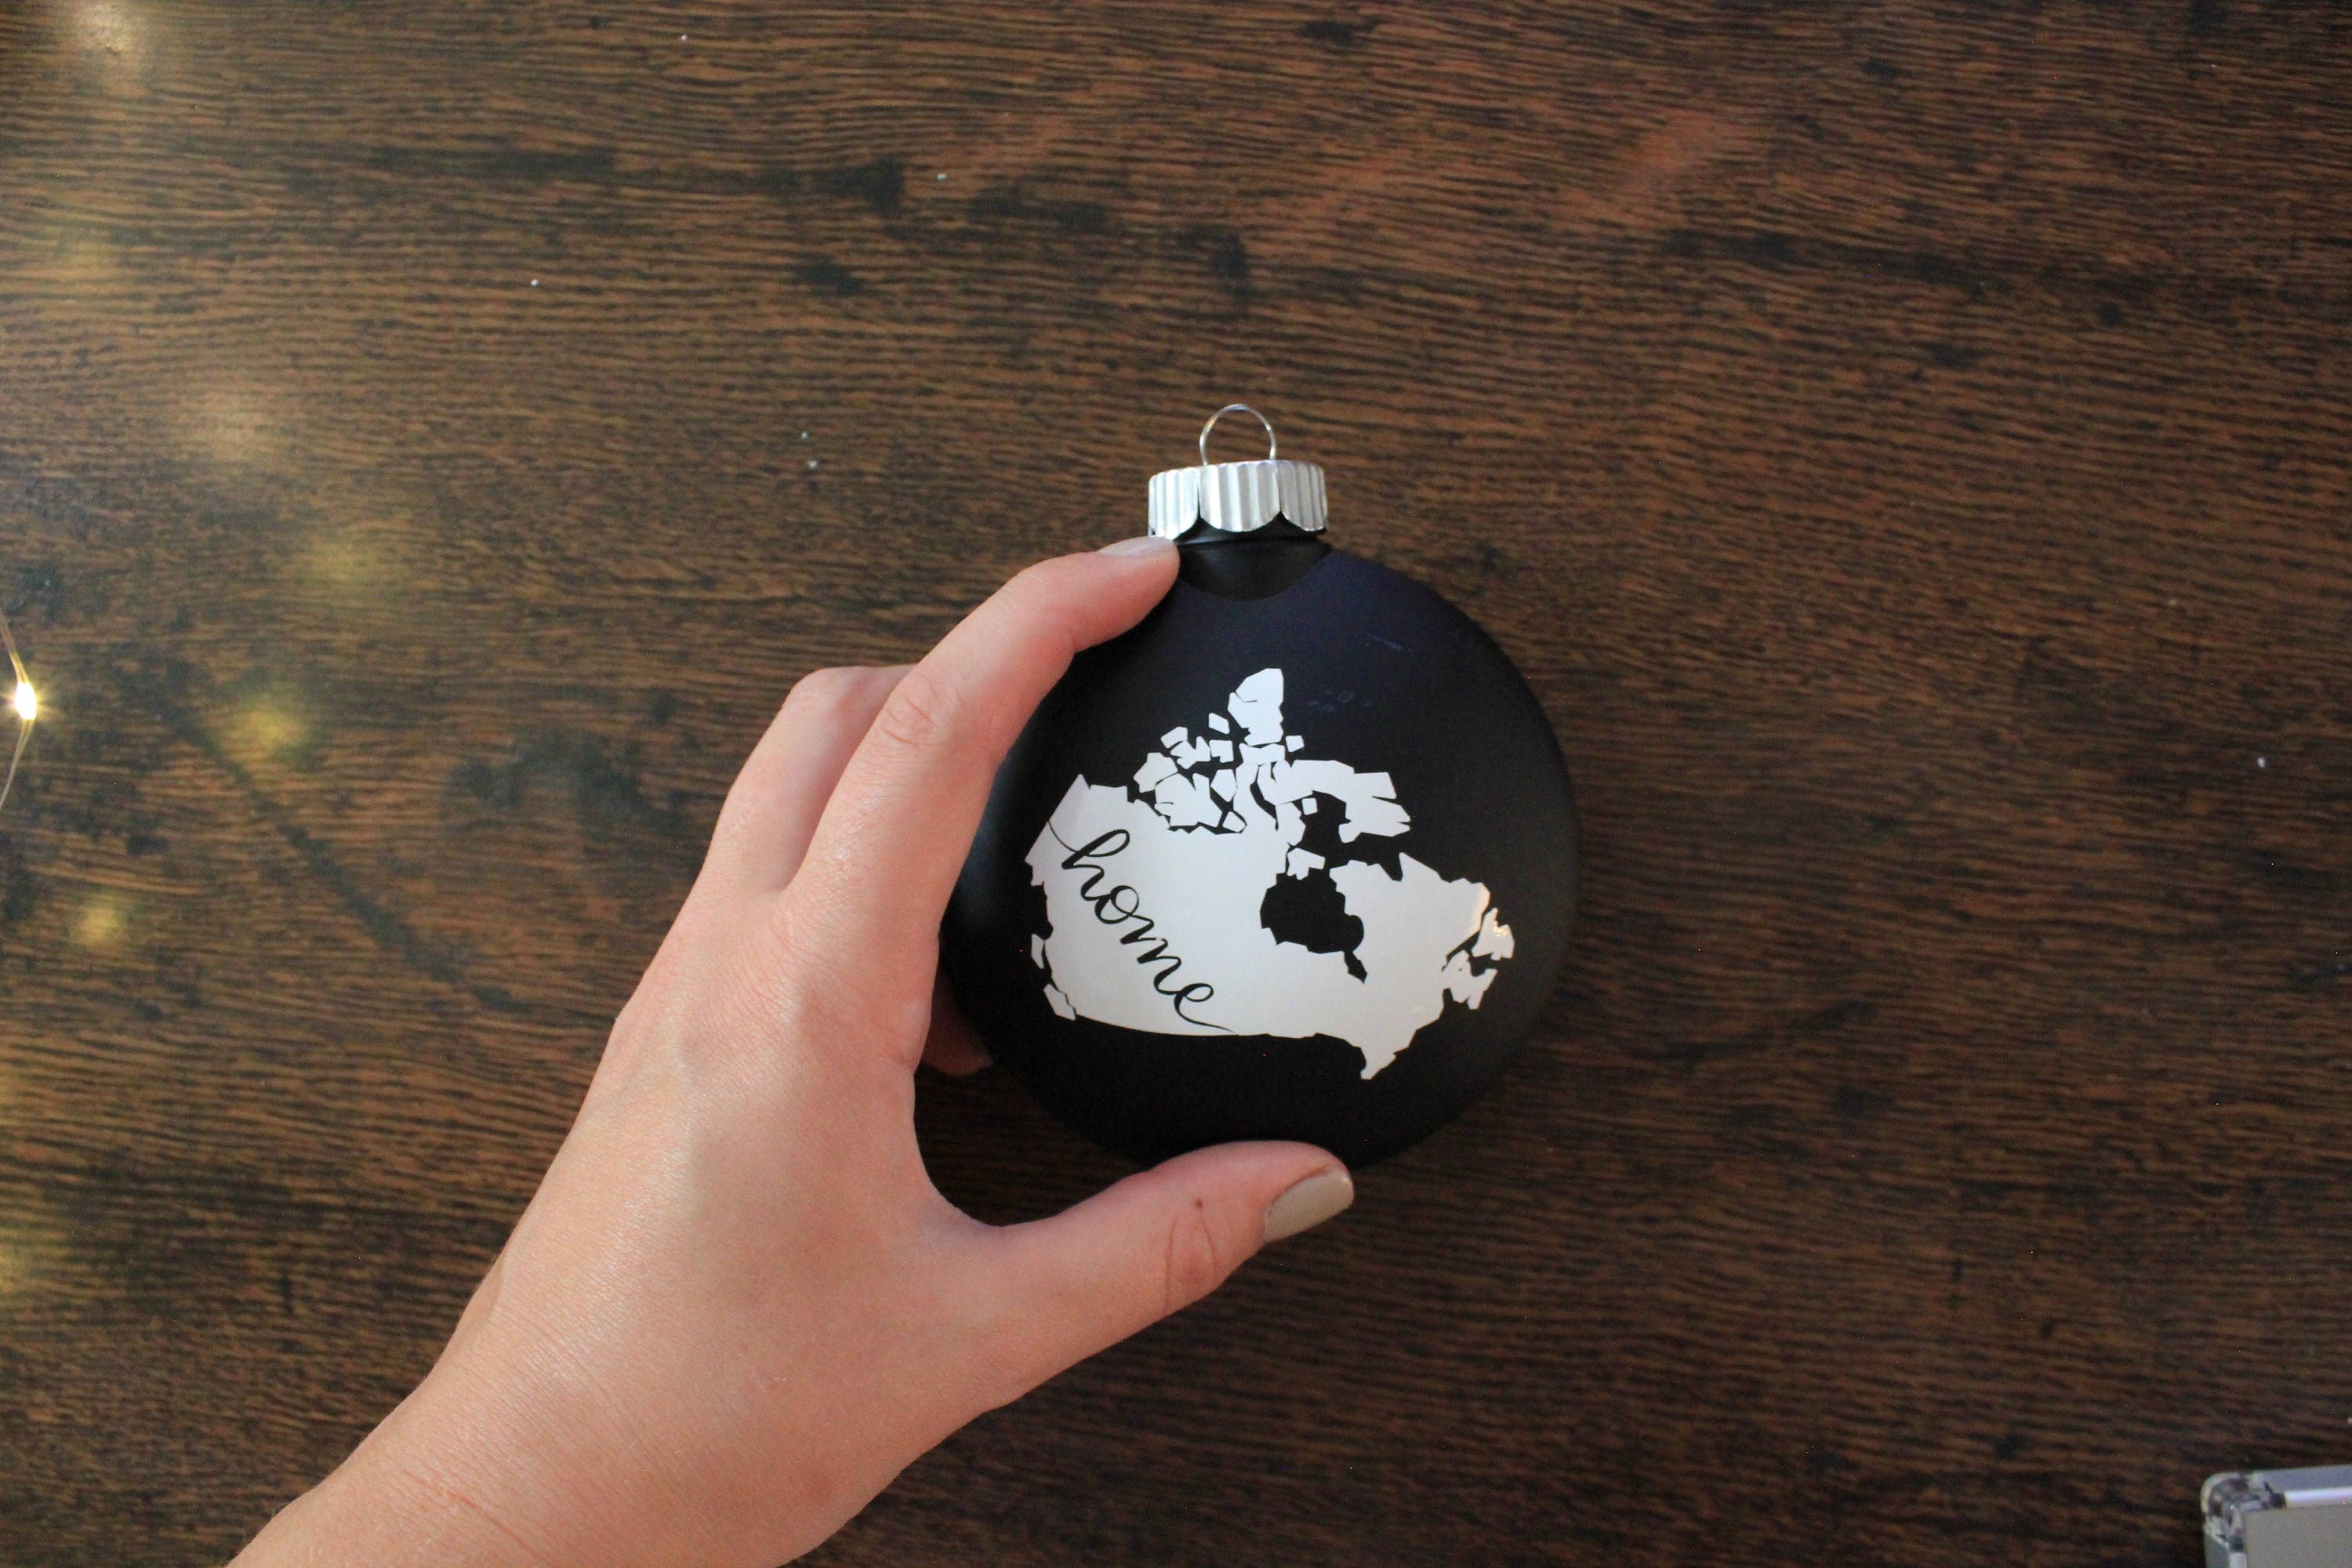 Christmas Ornaments|Long Distance Friends|Traveling Gifts| Gifts for her| Gifts for husband|USA Ornaments|Canada Ornaments|Gifts under 20